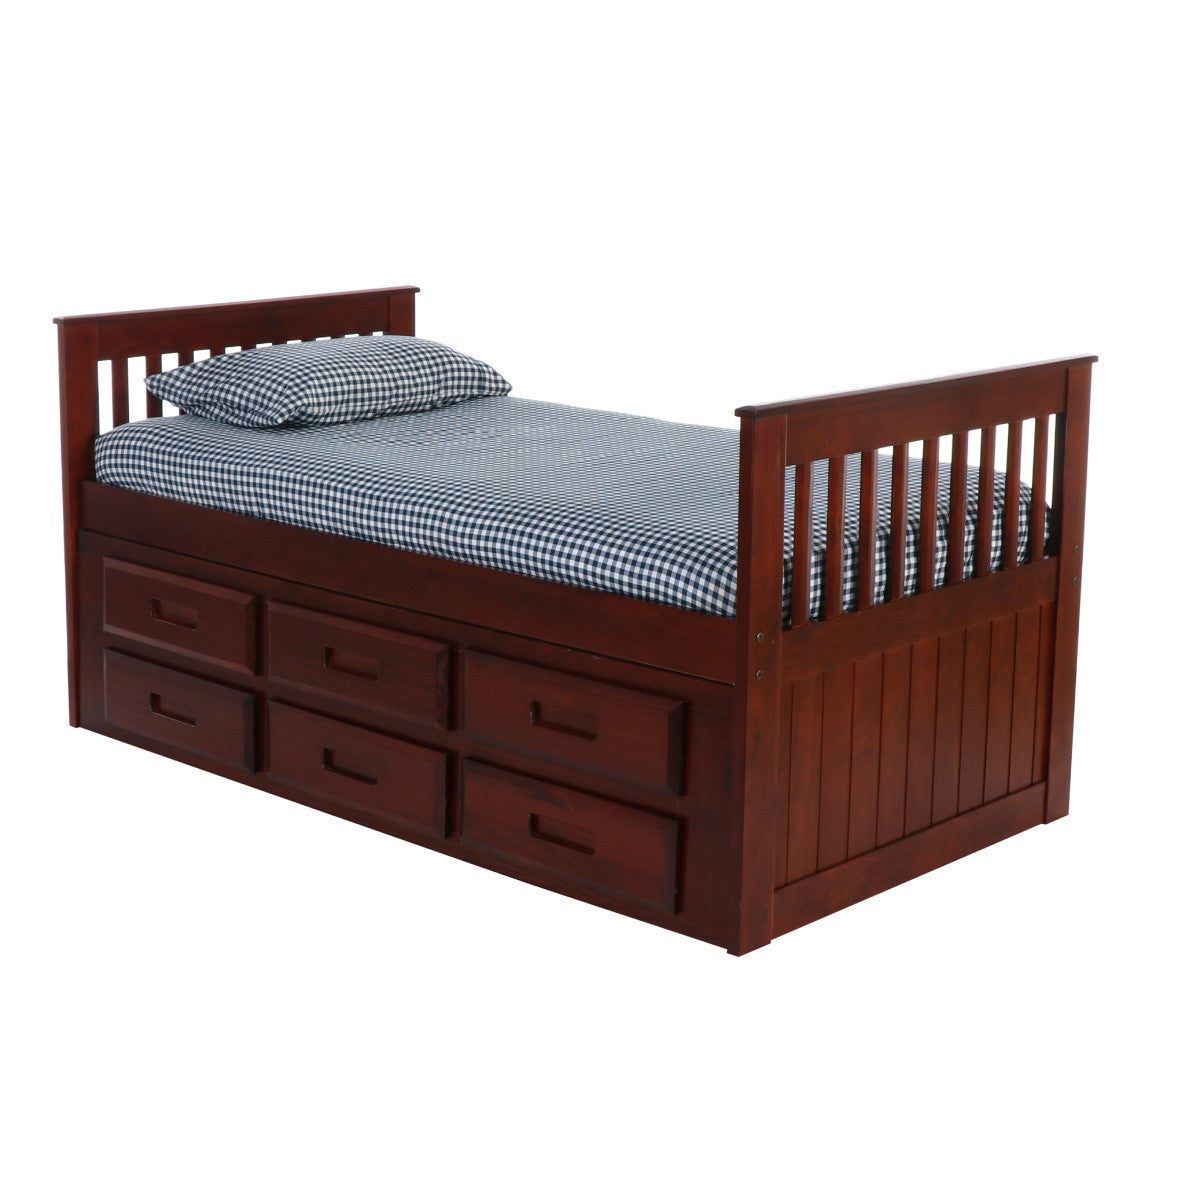 TWIN MISSION RAKE BED WITH 6 DRAWER UNDER BED STORAGE IN MERLOT FINISH